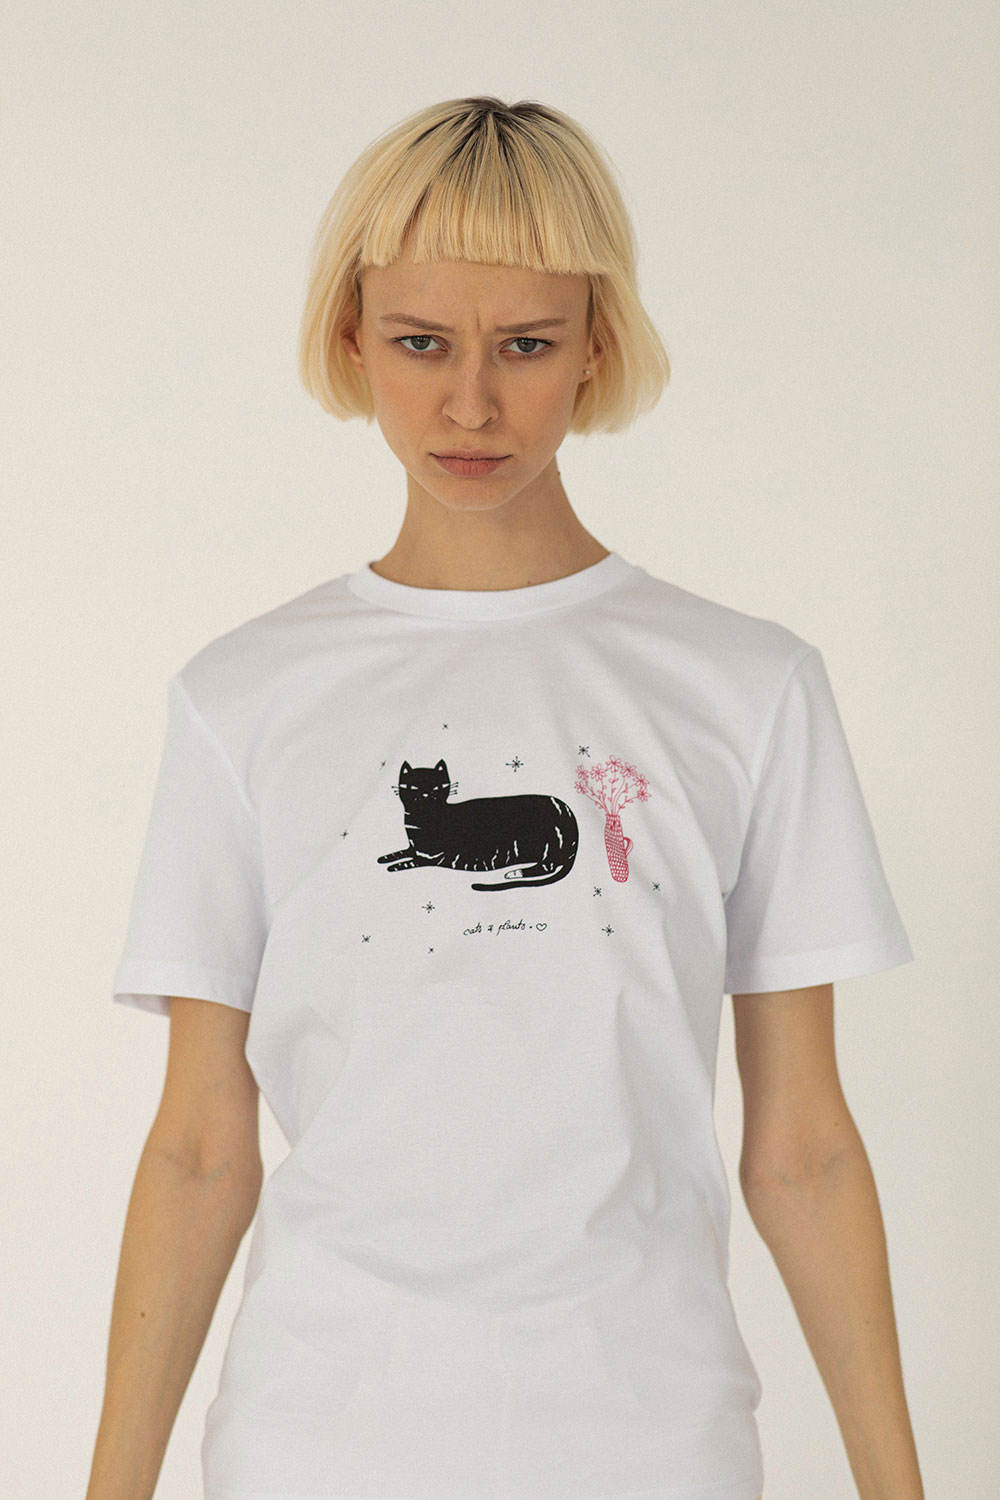 Woman wearing white cotton t-shirt with cat and plant in vase by Romanian brand.